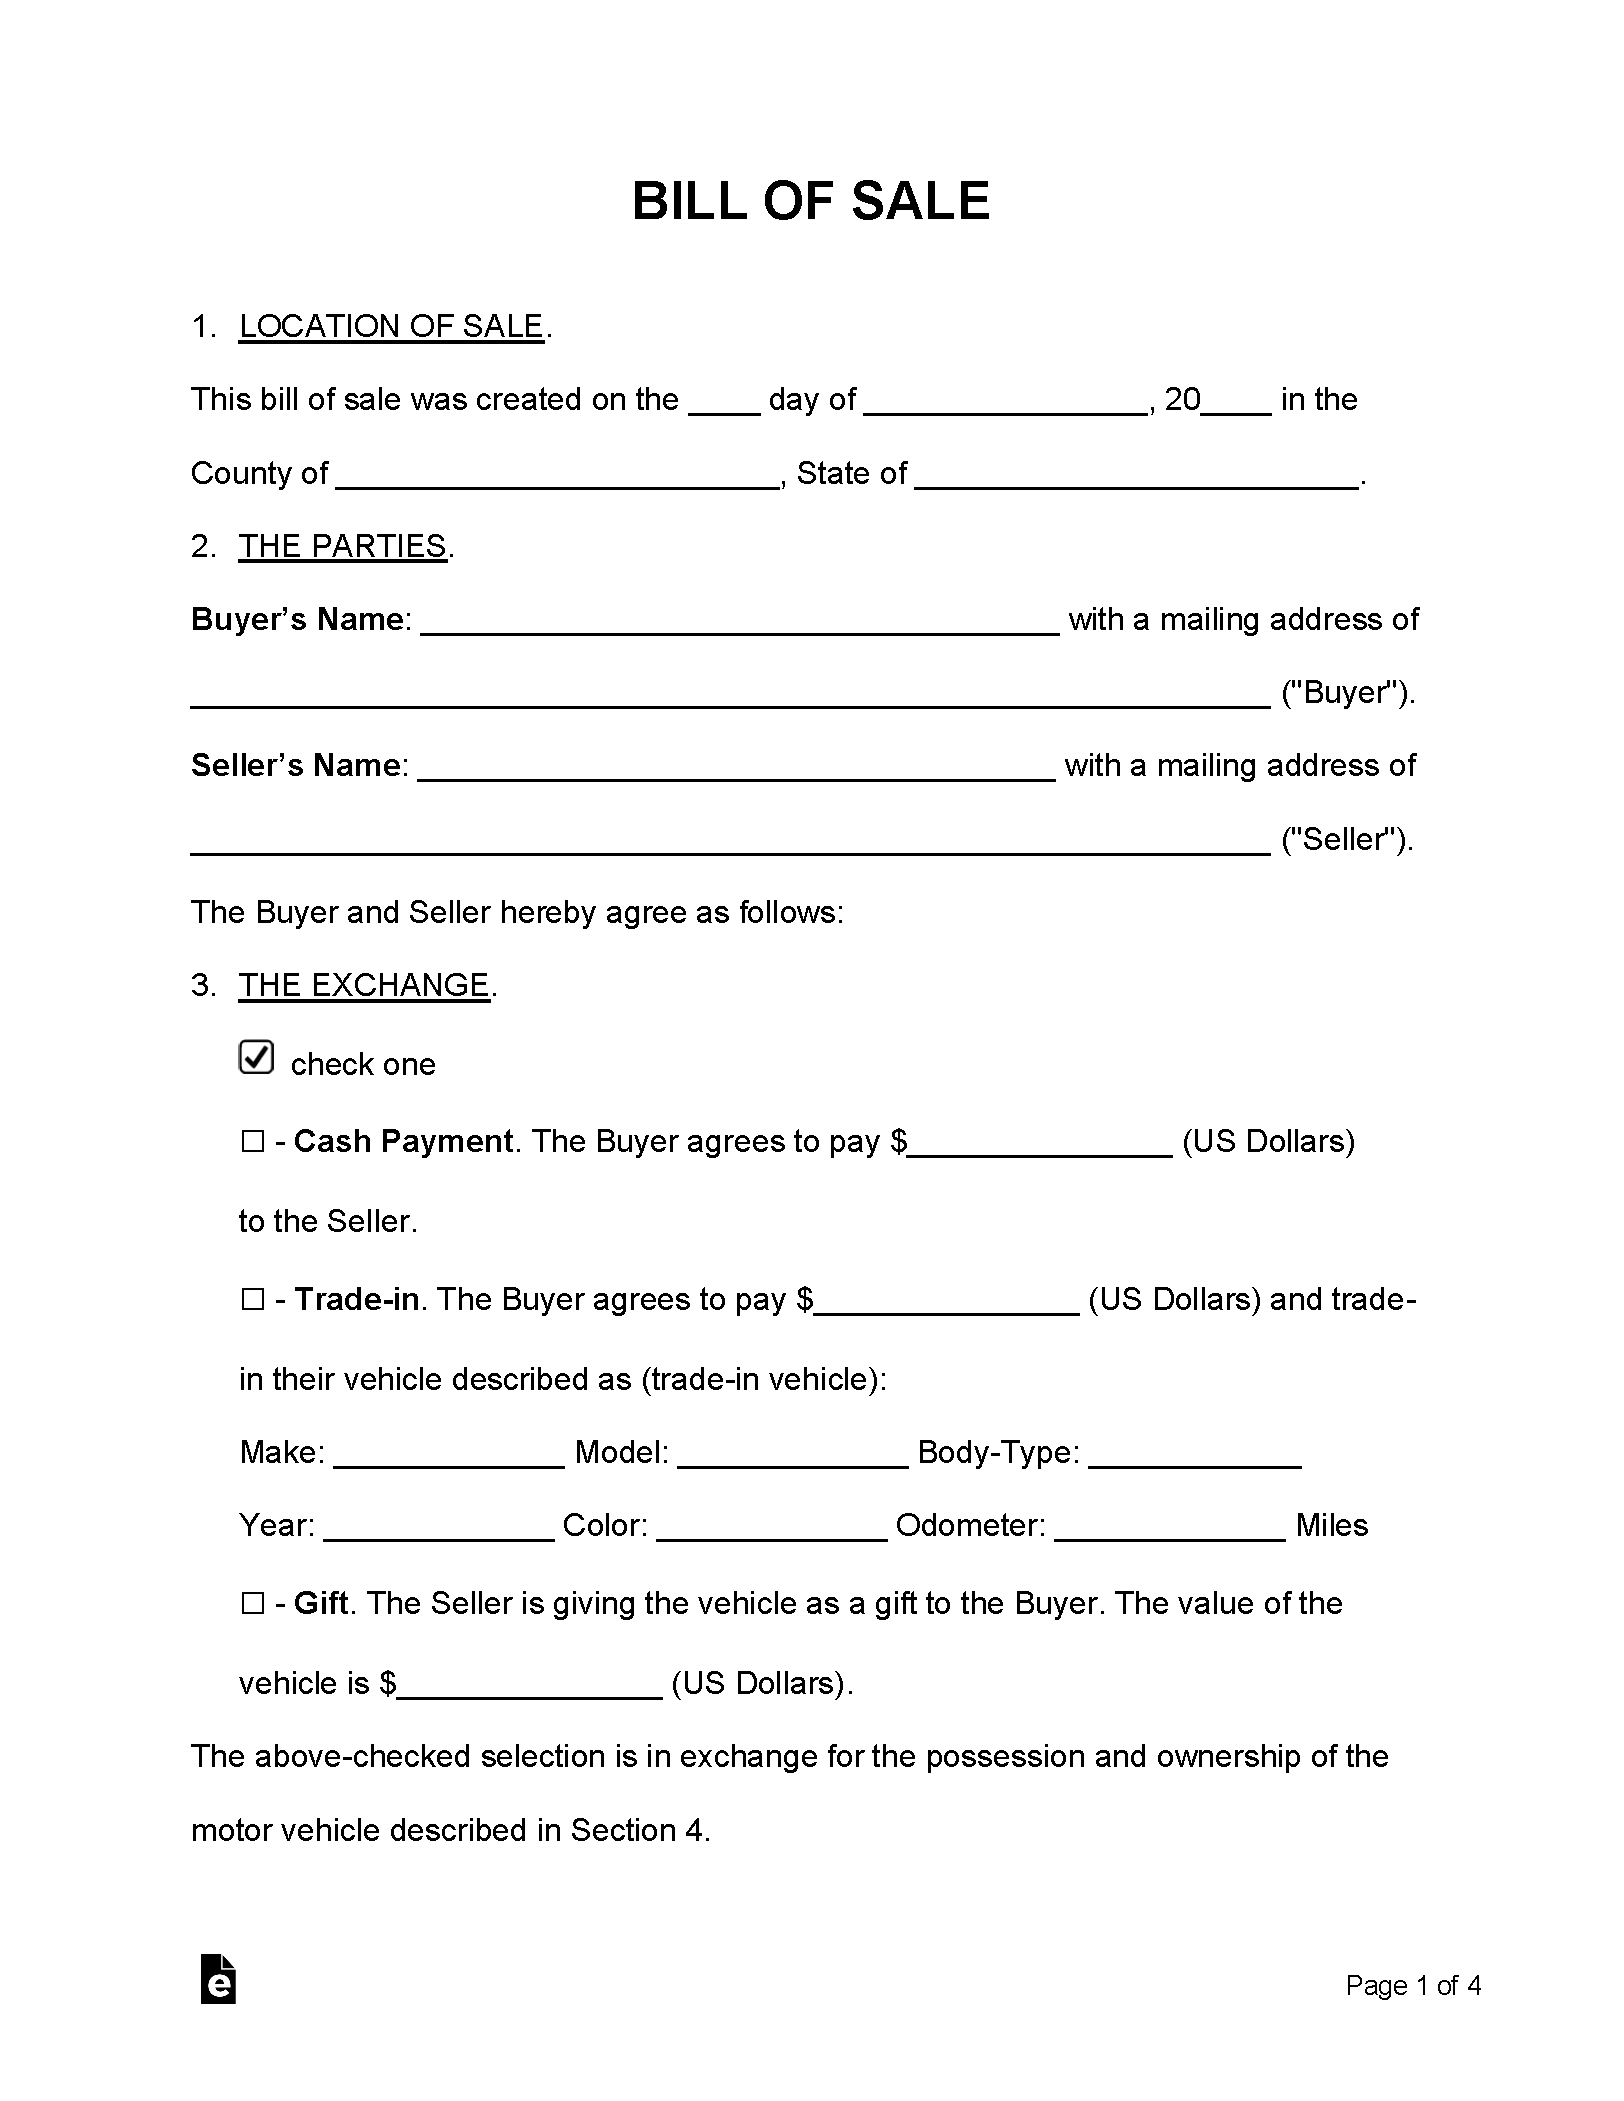 Free Bill Of Sale Forms 24 PDF Word EForms - Free Printable Bill of Sale Form